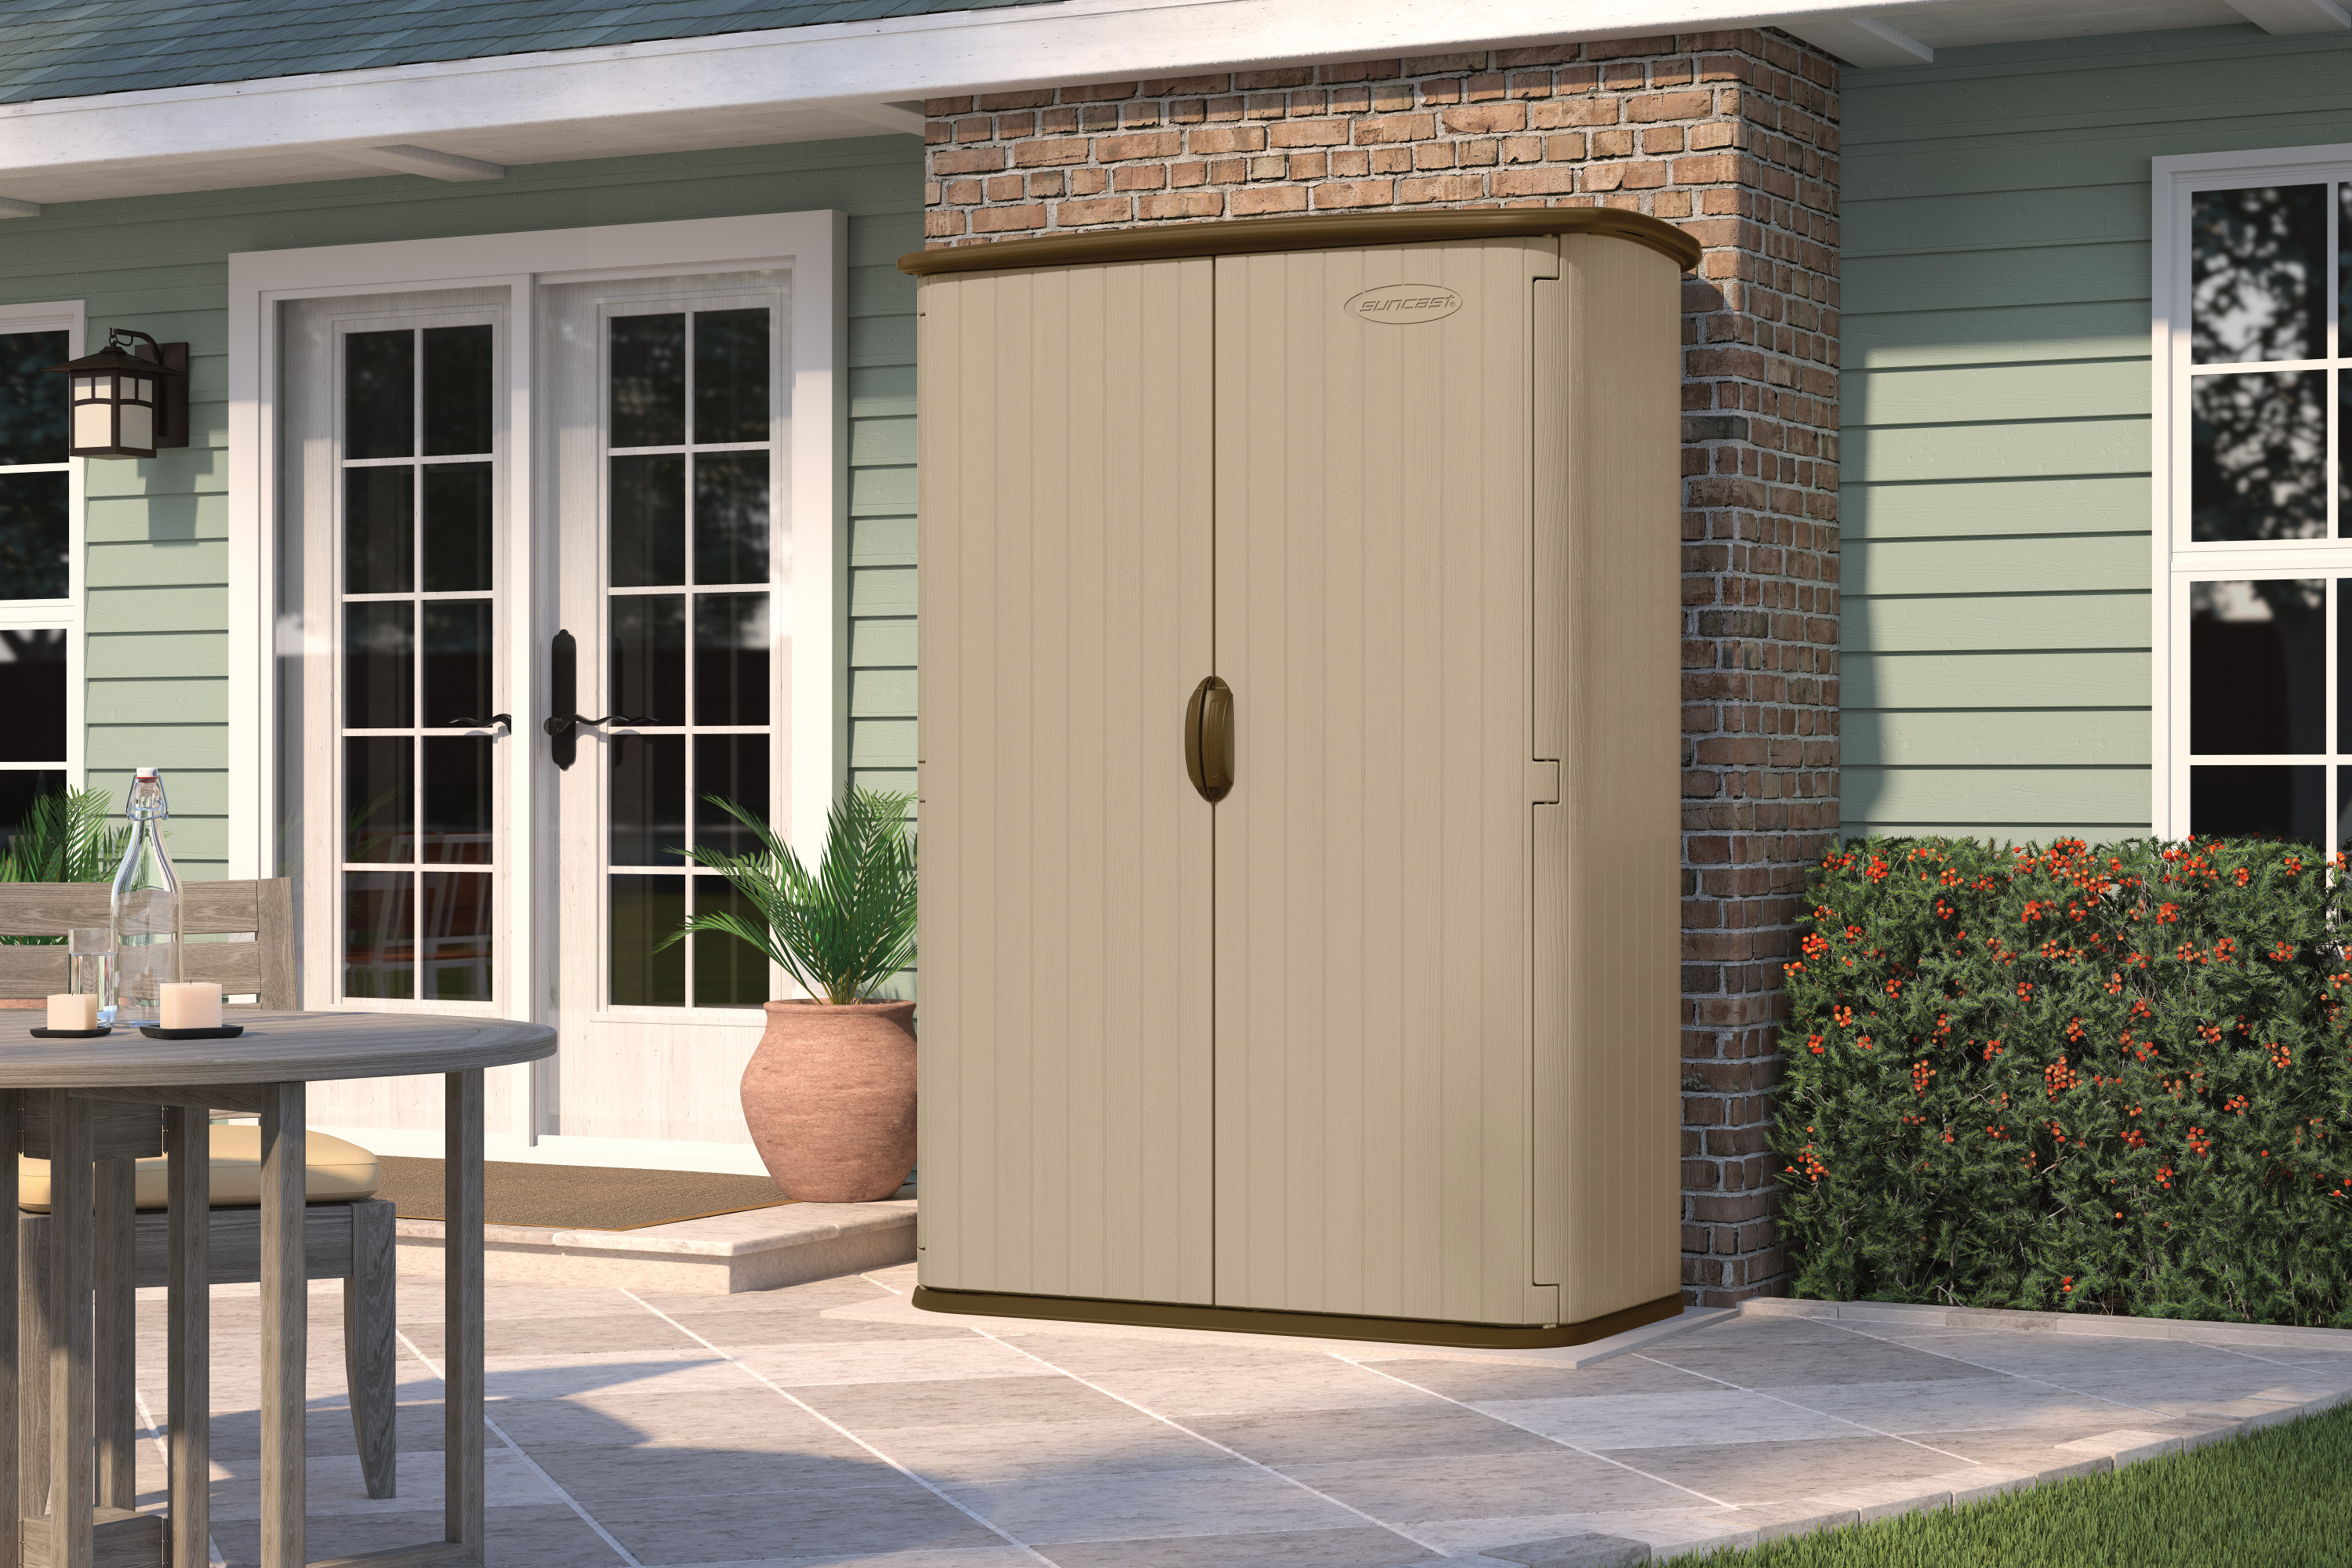 Suncast 52 cu. ft. Resin Vertical Storage Shed, Taupe, BMS4500 - image 3 of 9